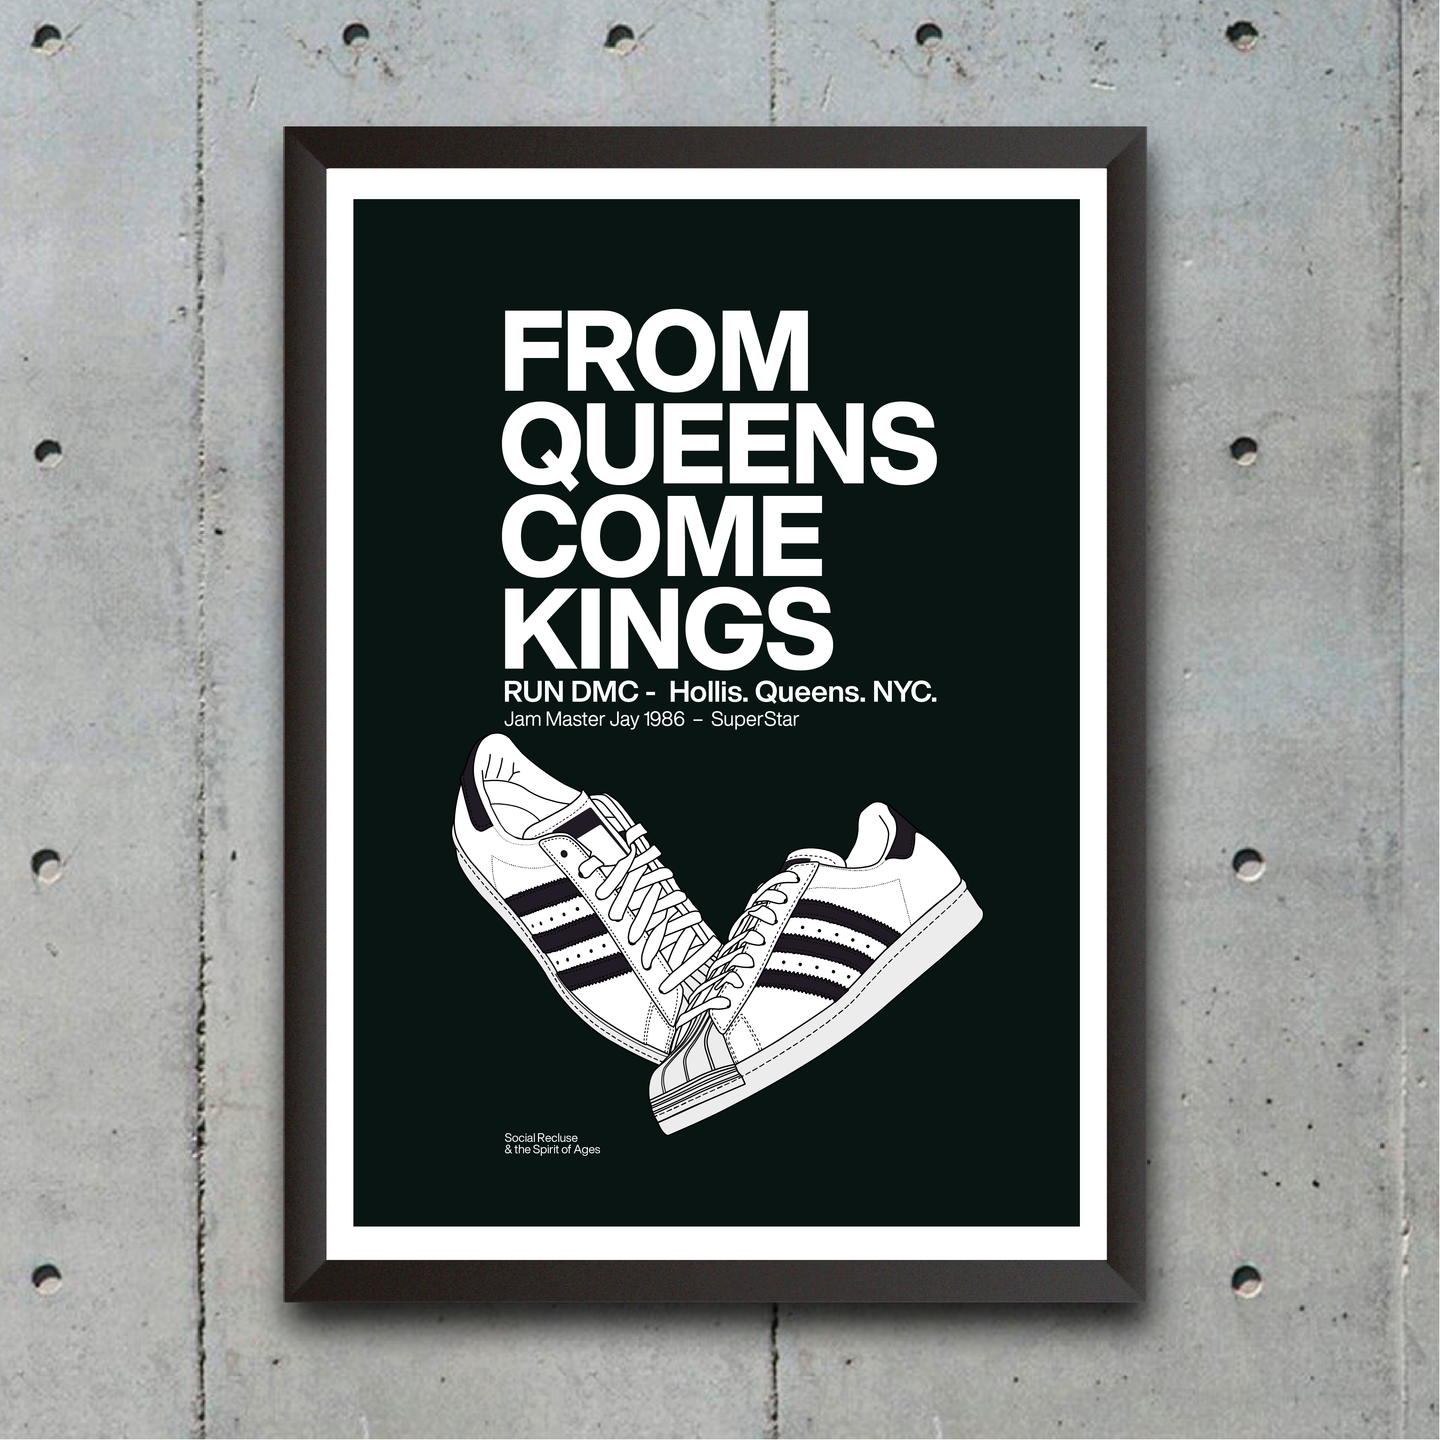 FROM QUEENS COME KINGS - PRINT